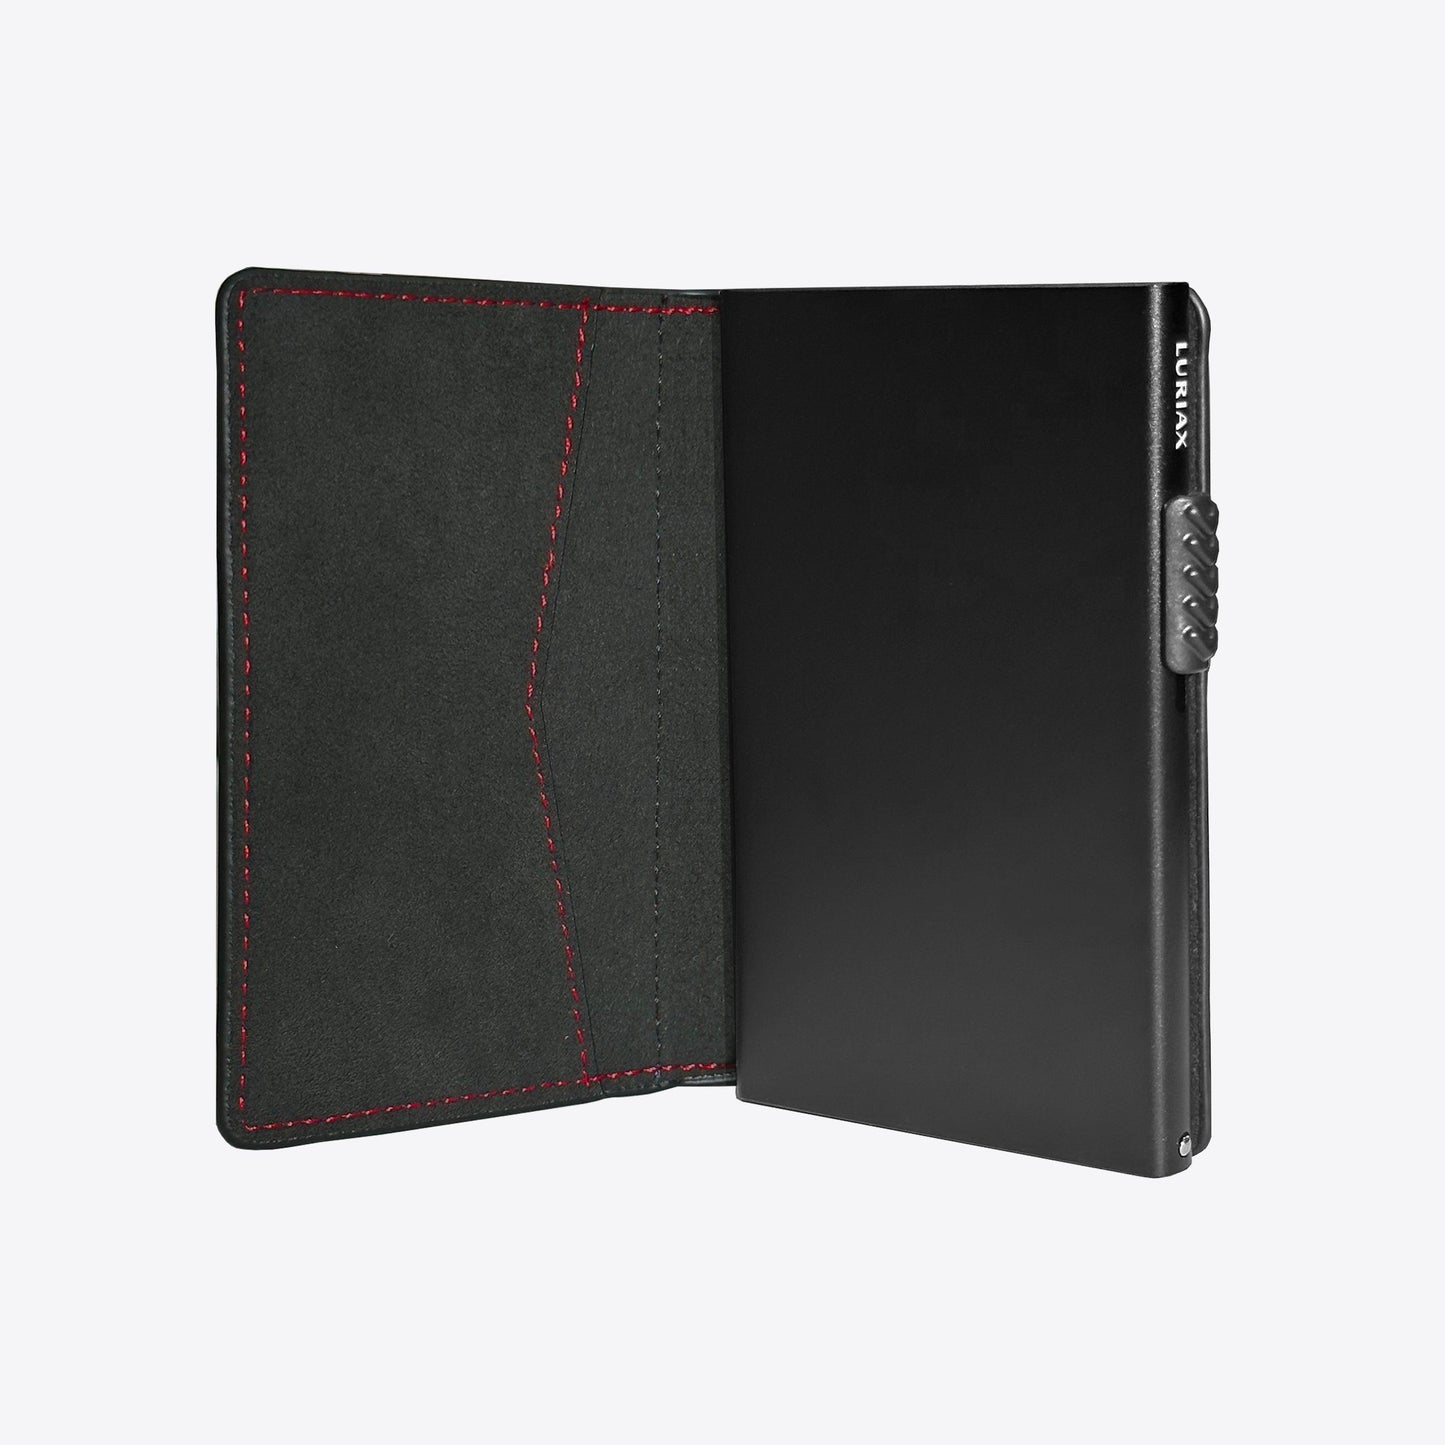 Alcantara Suede Leather iPhone Case and Accessories Collection - The Bifold Cardholder - Pure Black R - Luriax